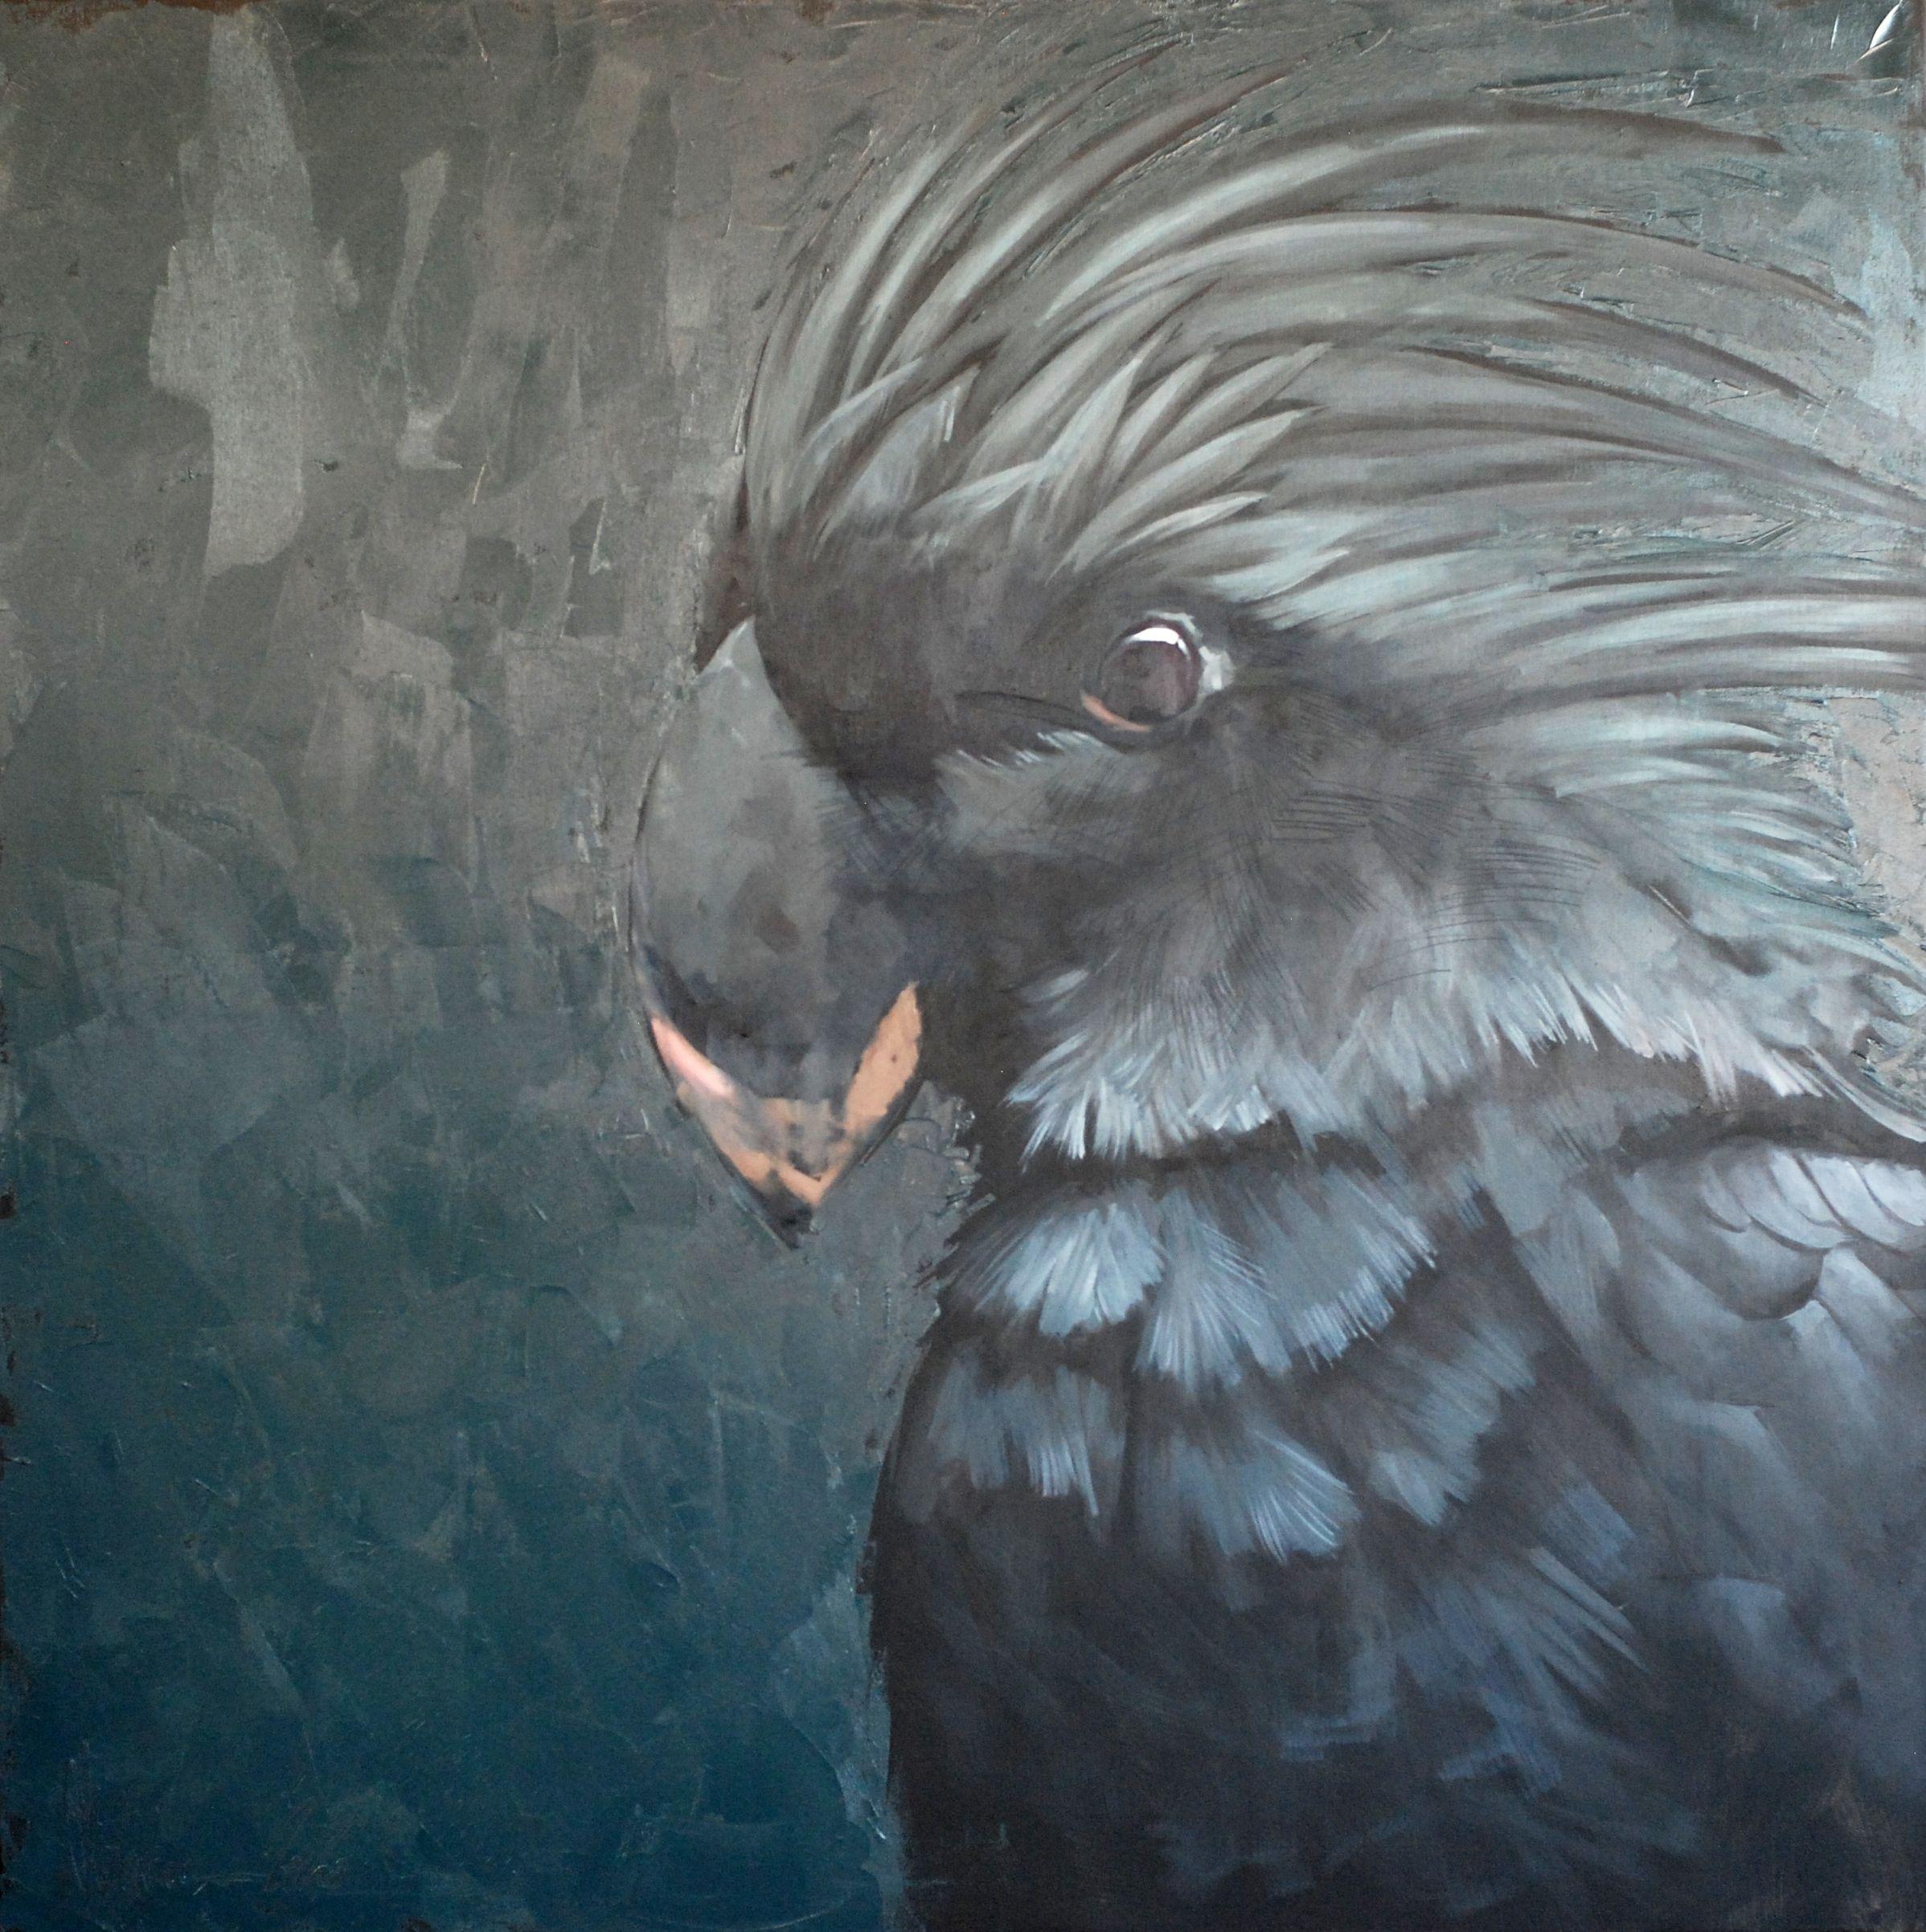 I called this work "Requiem". Not because everything is black or graphite. Not because a black parrot is a rarity. Not at all.  This is my reaction to the outside world. My reaction to the disturbing and tragic events that are happening around us